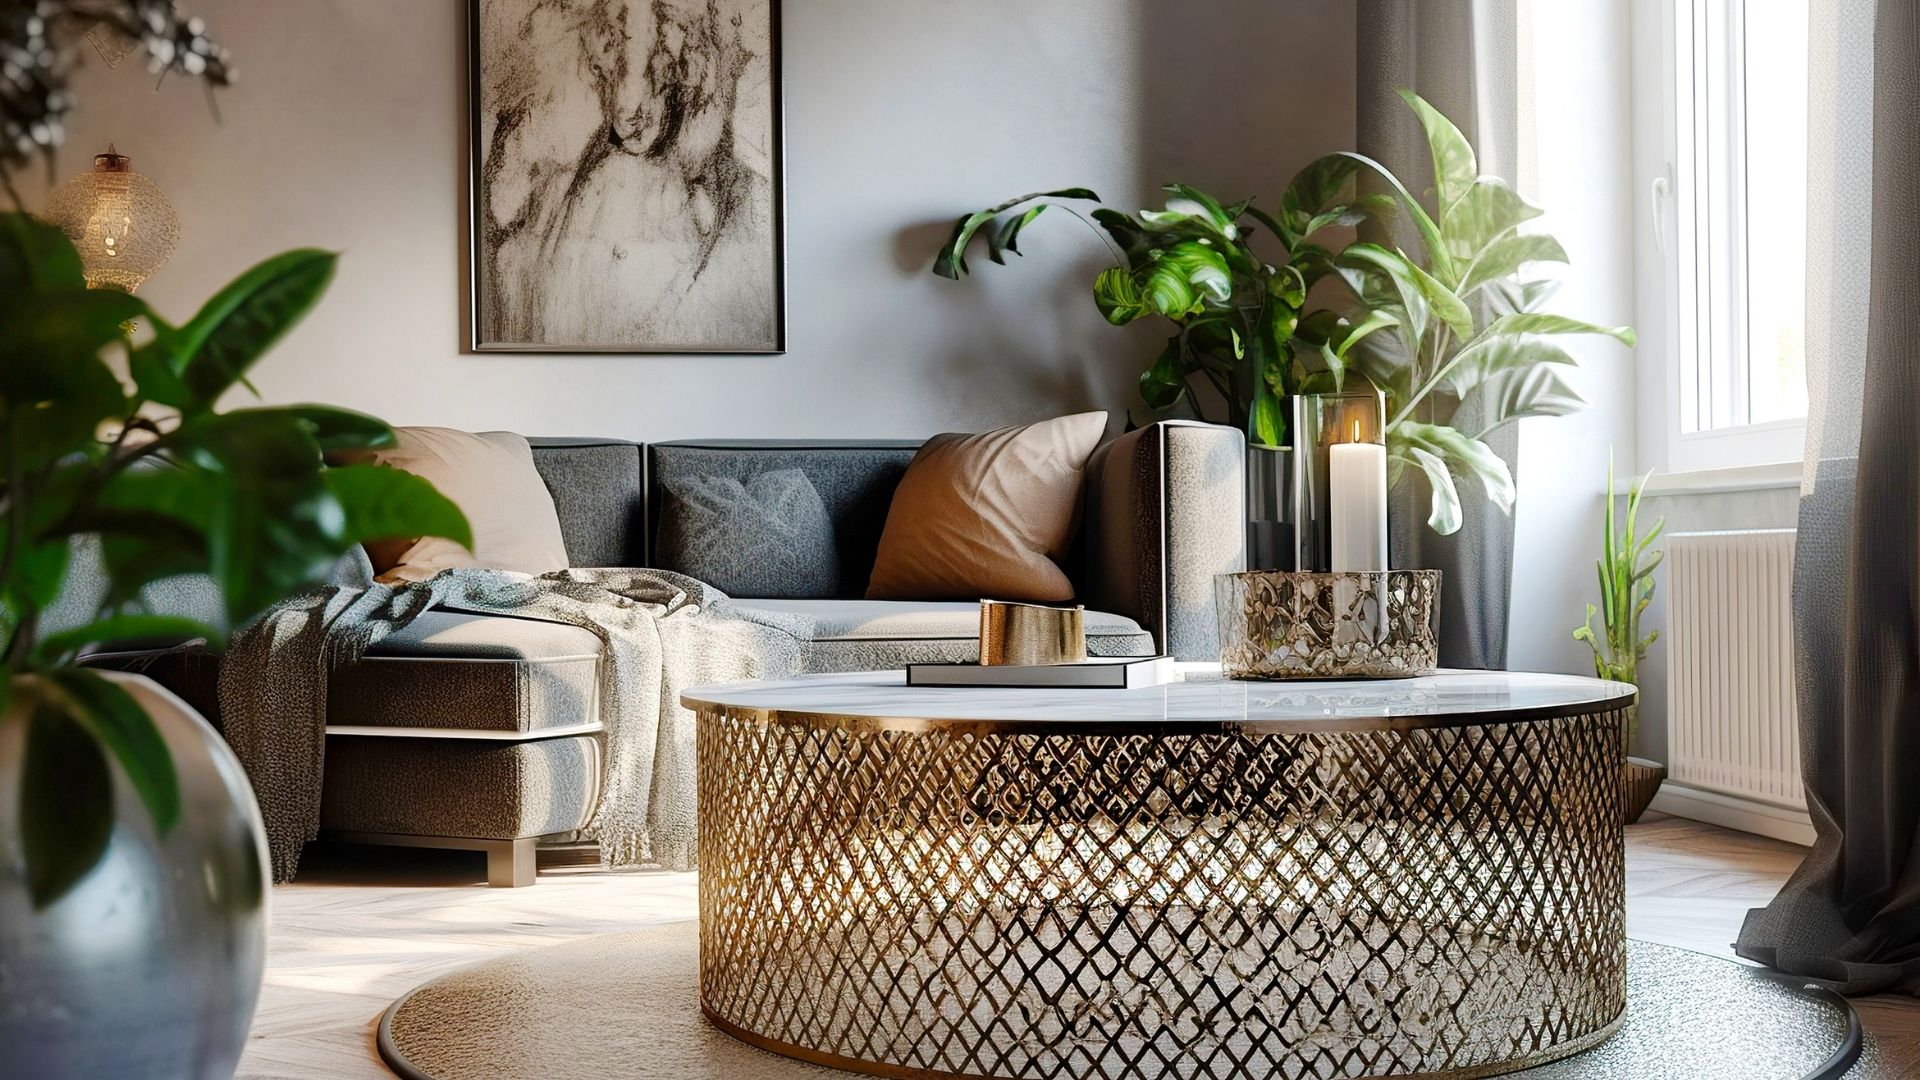 Contemporary living room with grey couch, pillows, plants, and a circular coffee table with brass mesh accents.